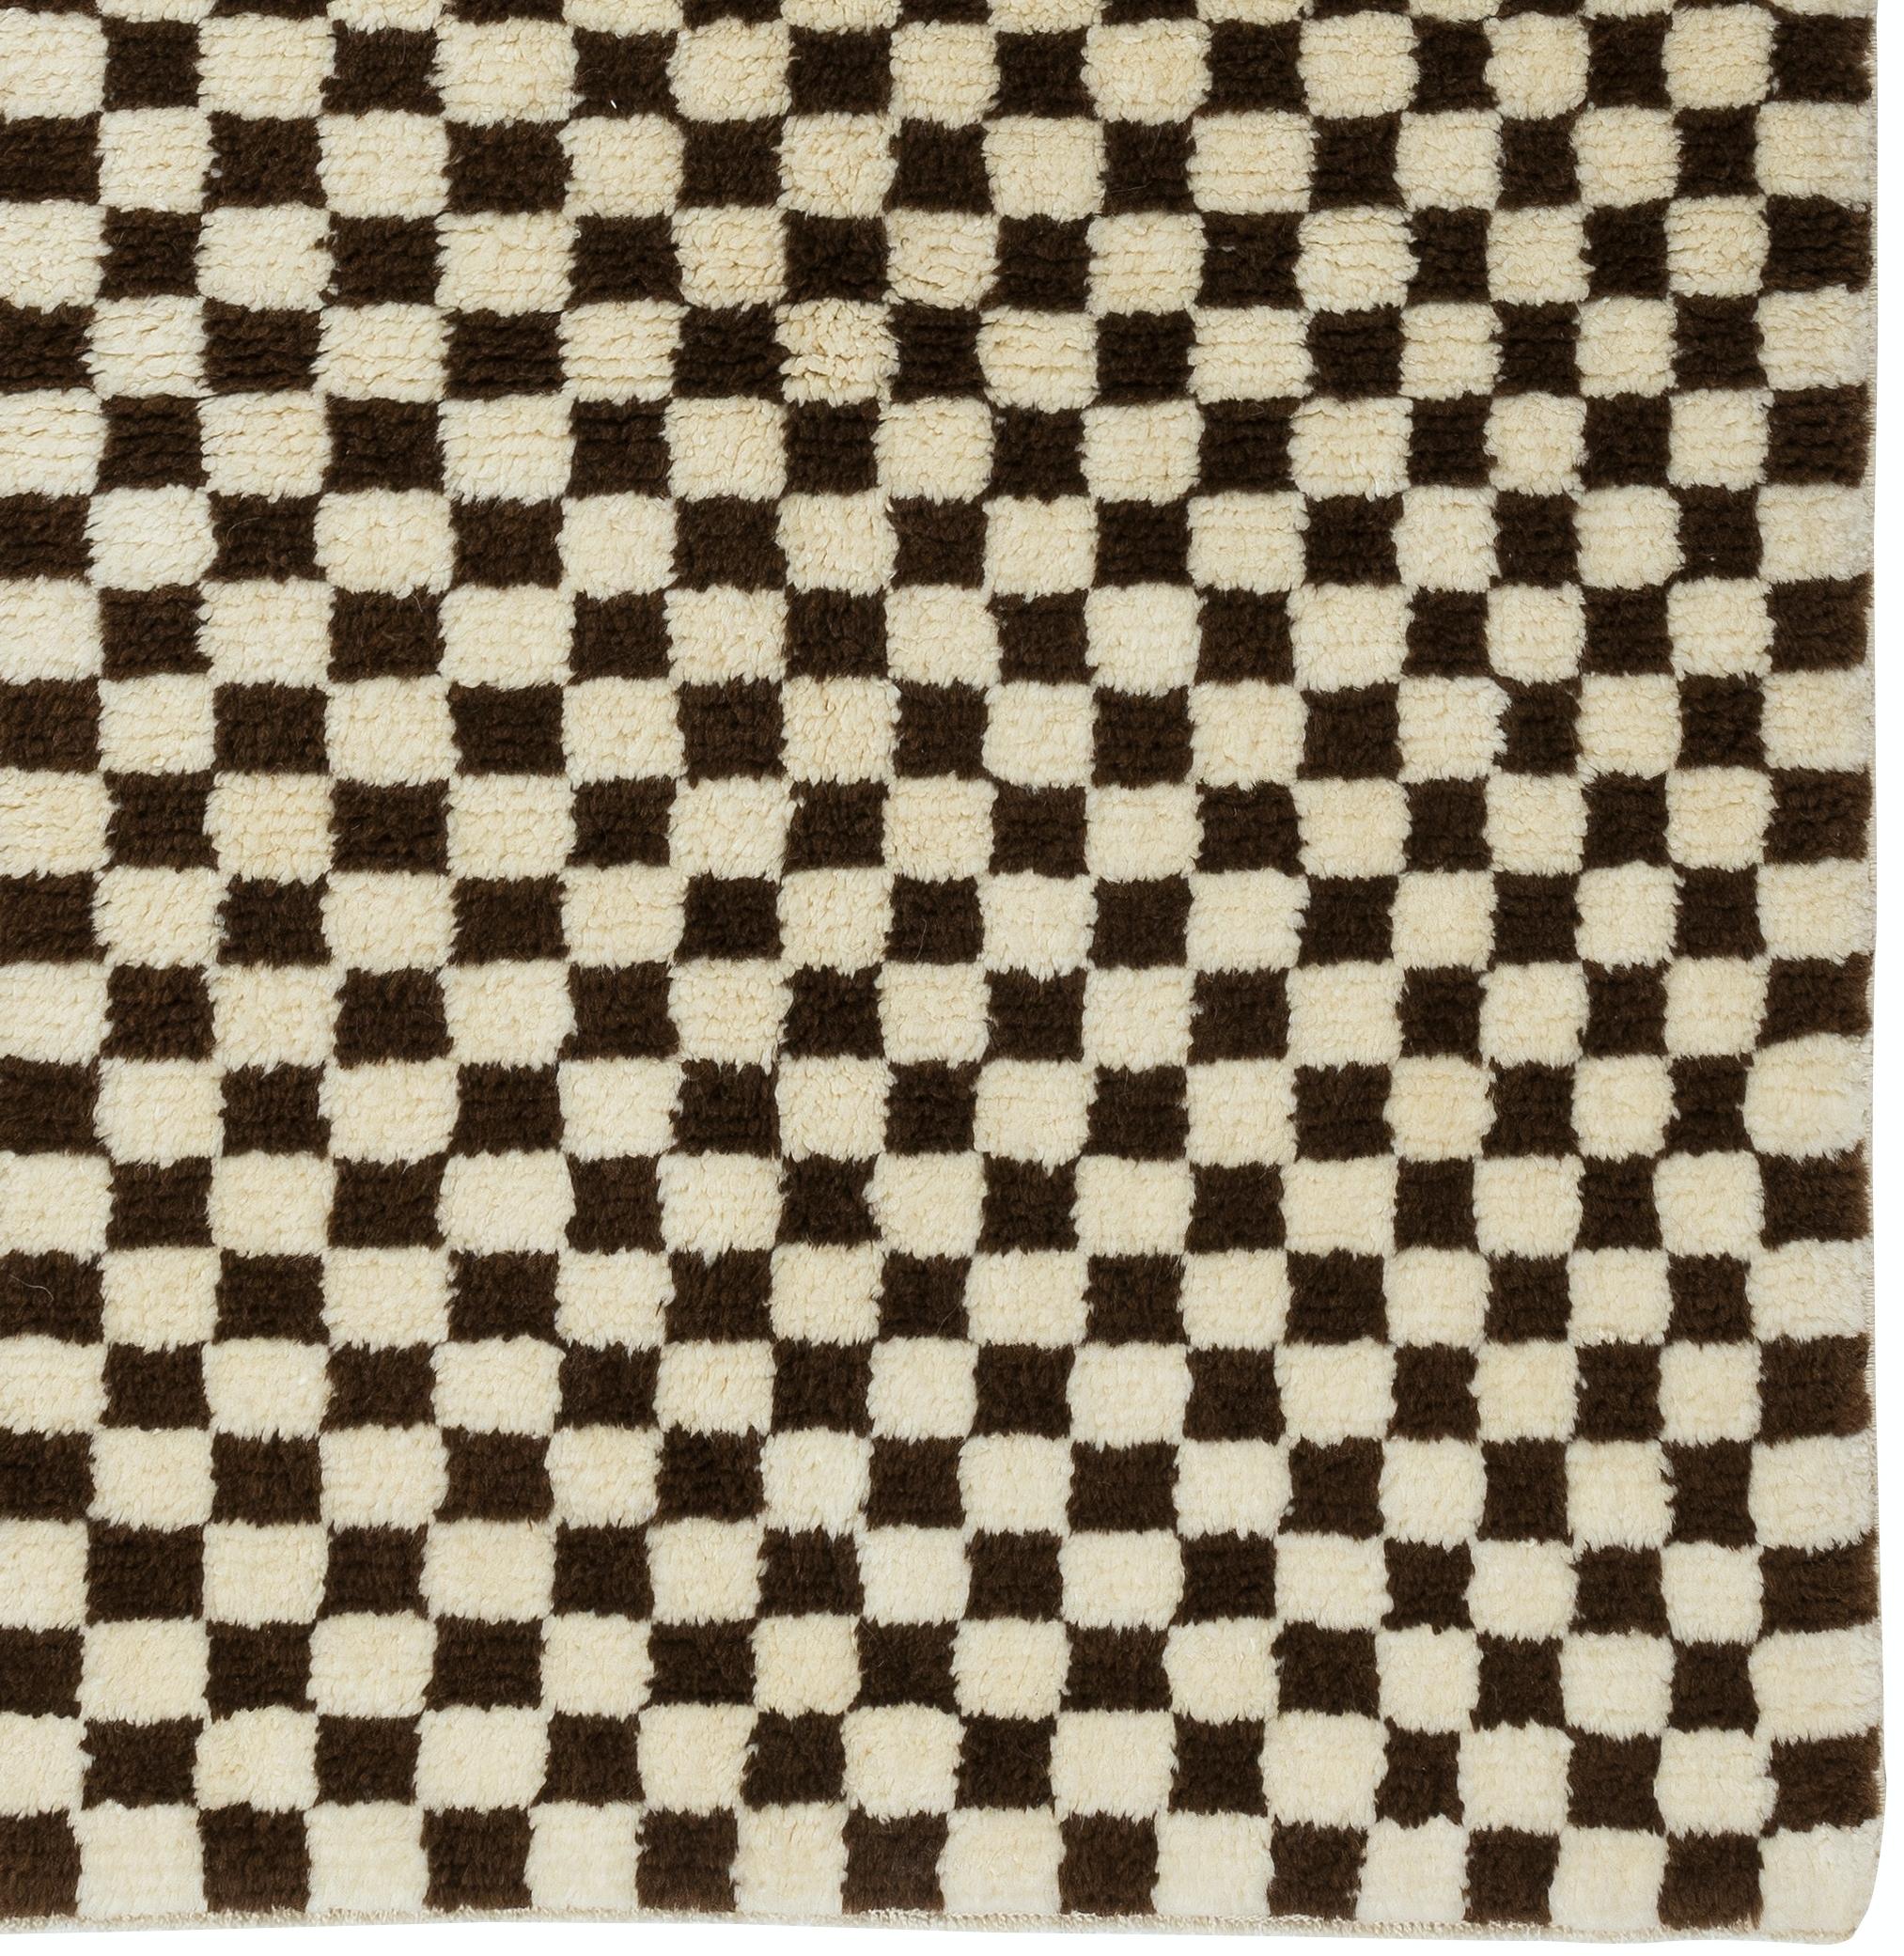 A custom, handmade Tulu rug made from 100% hand-spun wool of finest quality. It features a simple checkered design in cream and radiant brown. Size: 4x6 ft.

Available as seen or can be CUSTOM PRODUCED in any Design, Size, Color Combination and Pile